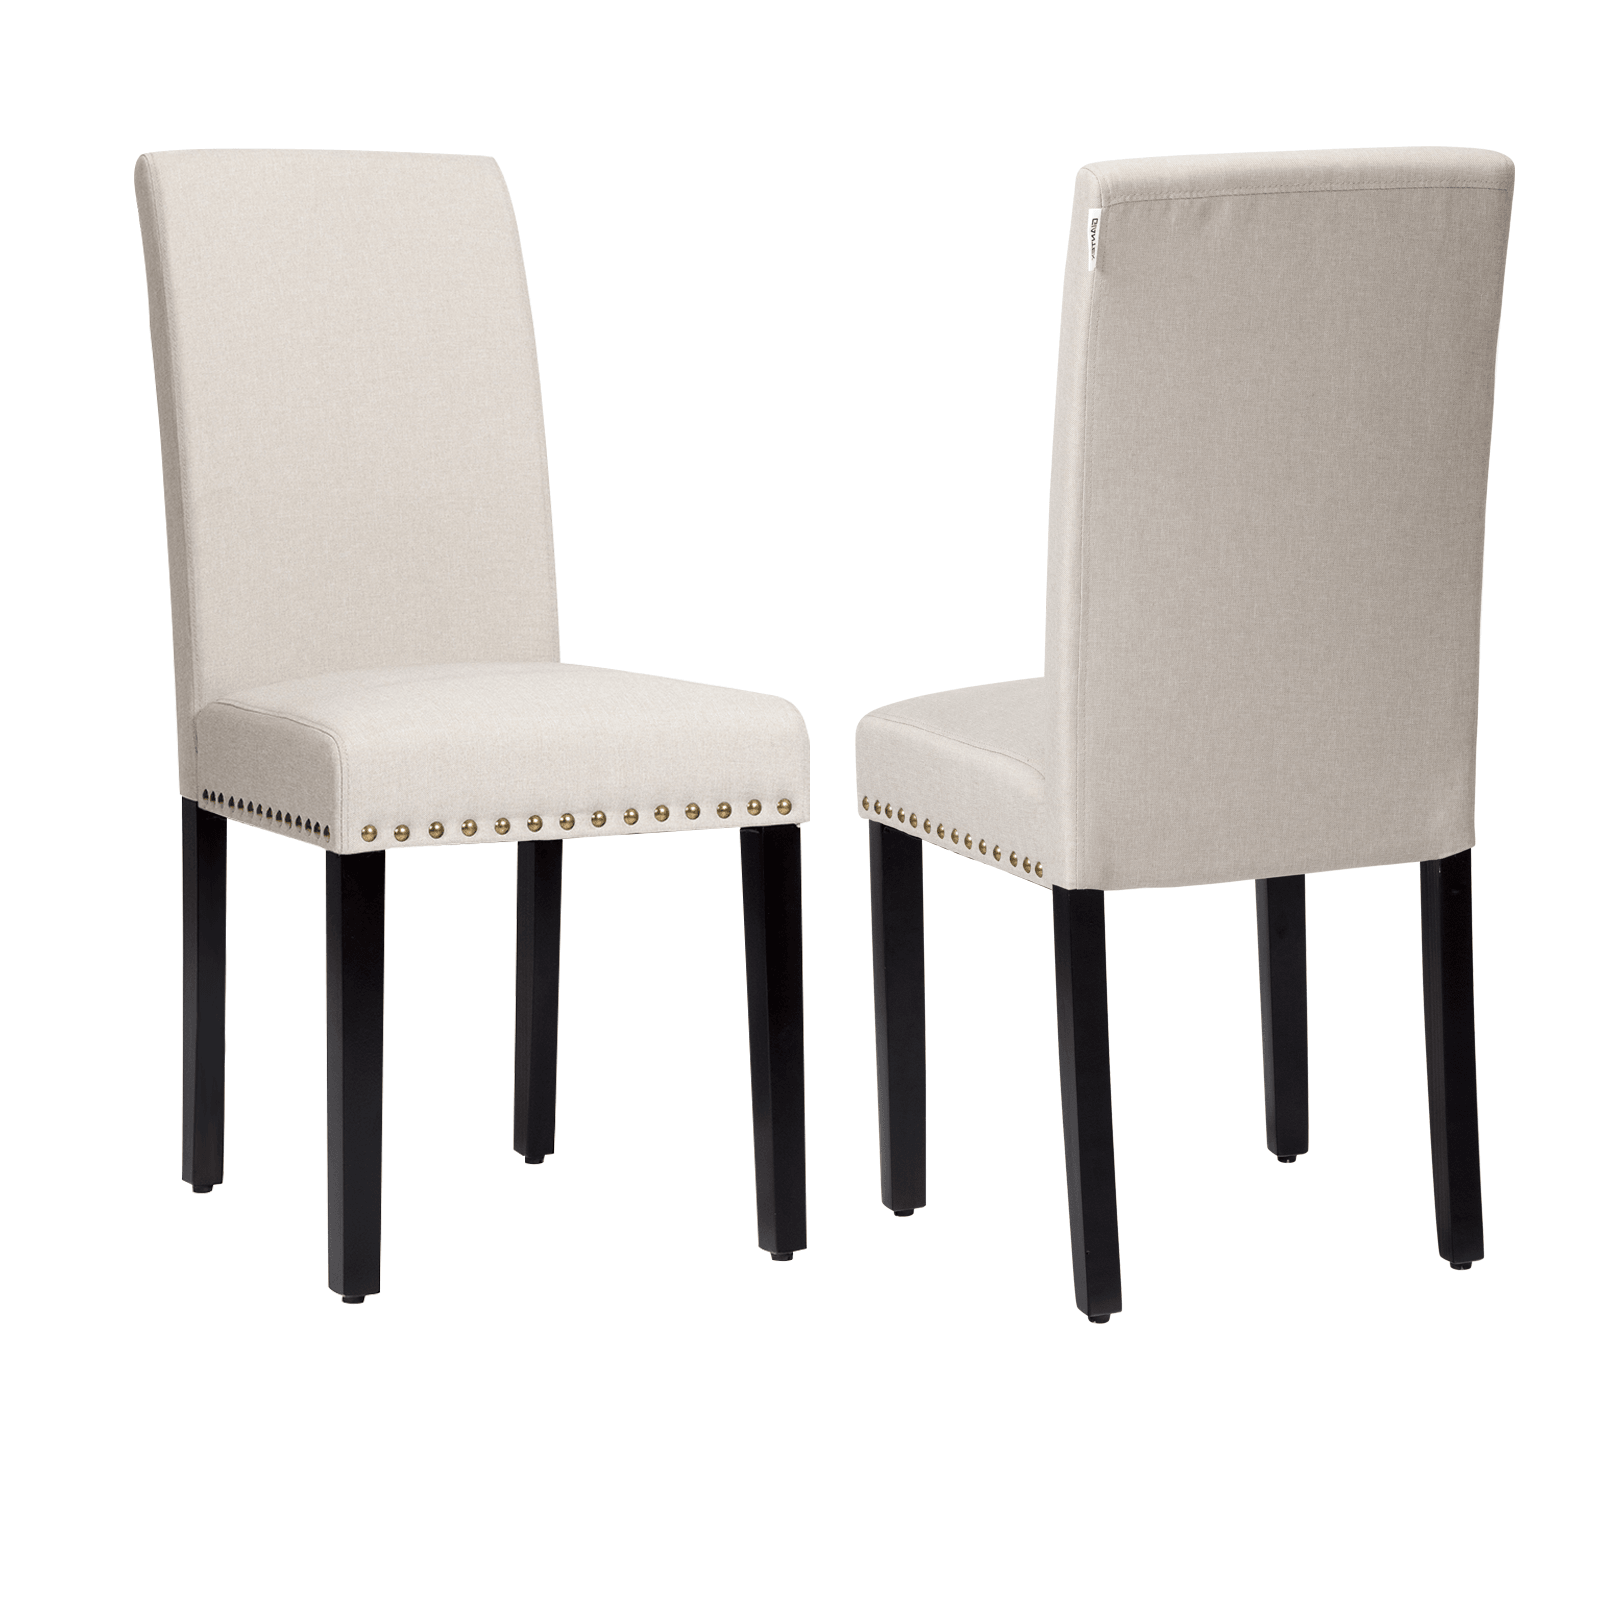 Giantex Upholstered Dining Chairs Set of 2 or 4, Fabric Side Chairs w/Wood Legs - Giantexus